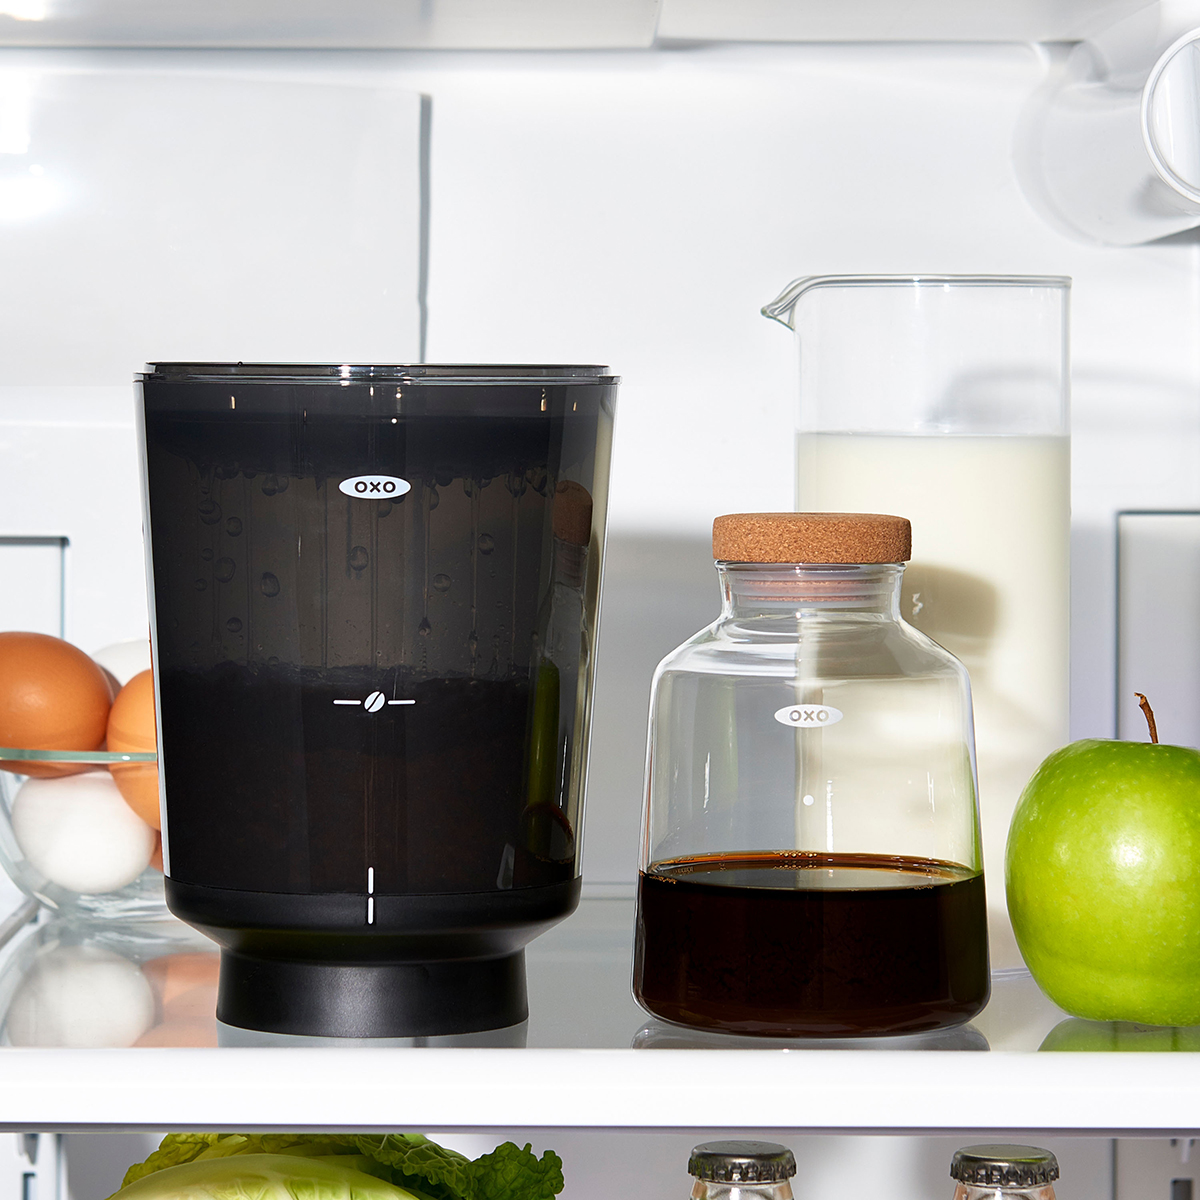 https://www.containerstore.com/catalogimages/428008/10086154-OXO%20BREW%20Compact%20Cold%20Brew%20.jpg